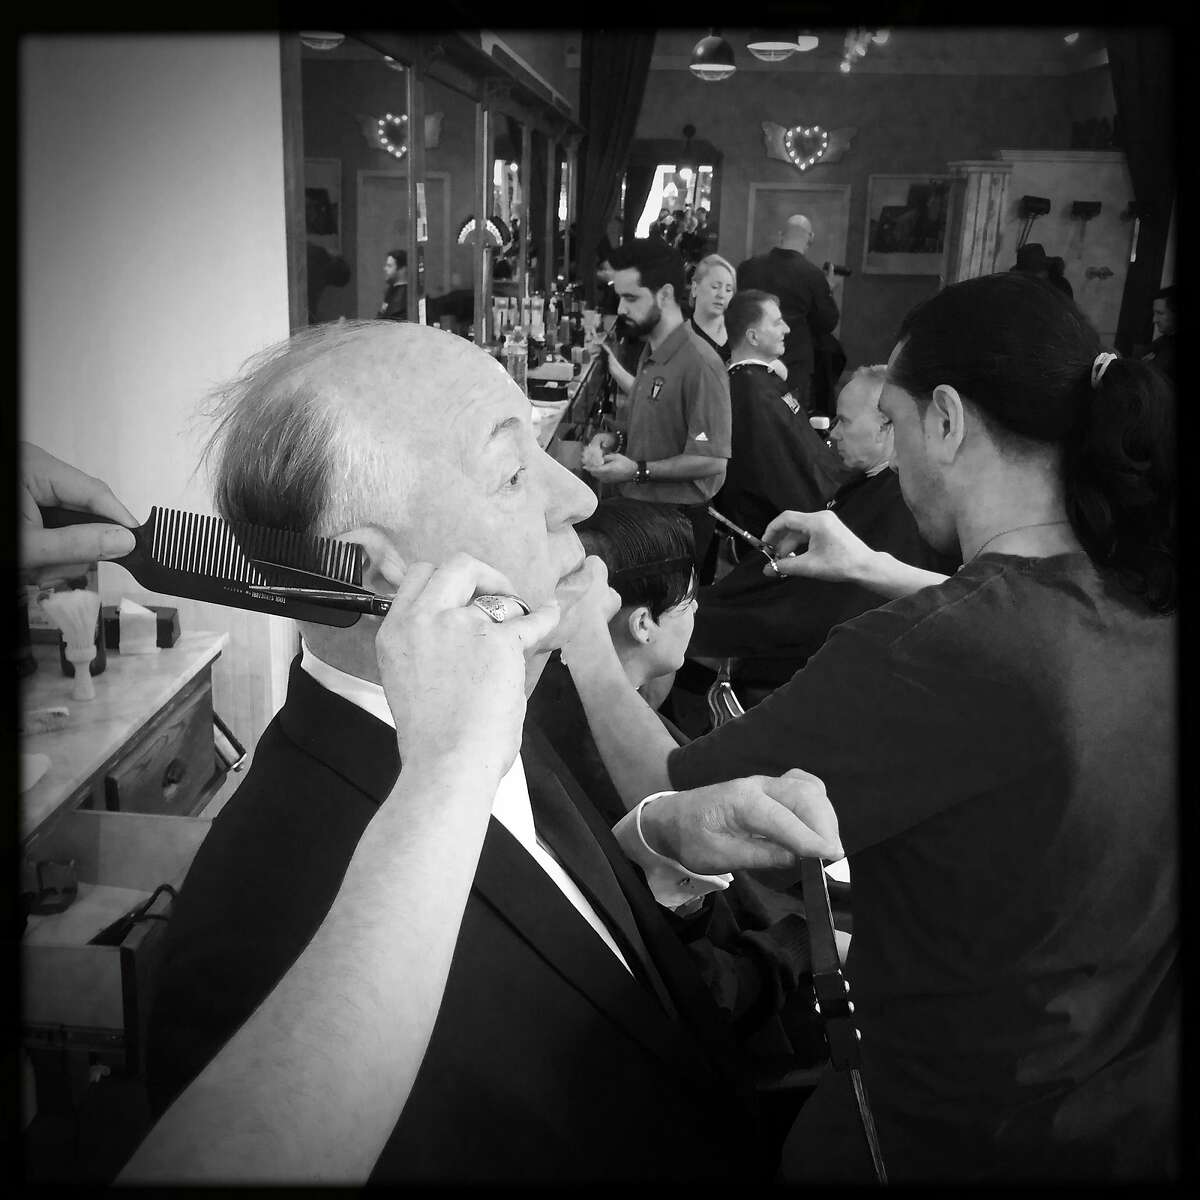 As Michael Casias (right) styles Joanna Pluhowski's hair, David Garcia pretends to trim the hair of a wax figure of Alfred Hitchcock that Madame Tussaud's brought to Peoples Barber in San Francisco, Calif., on Friday, March 10, 2017.